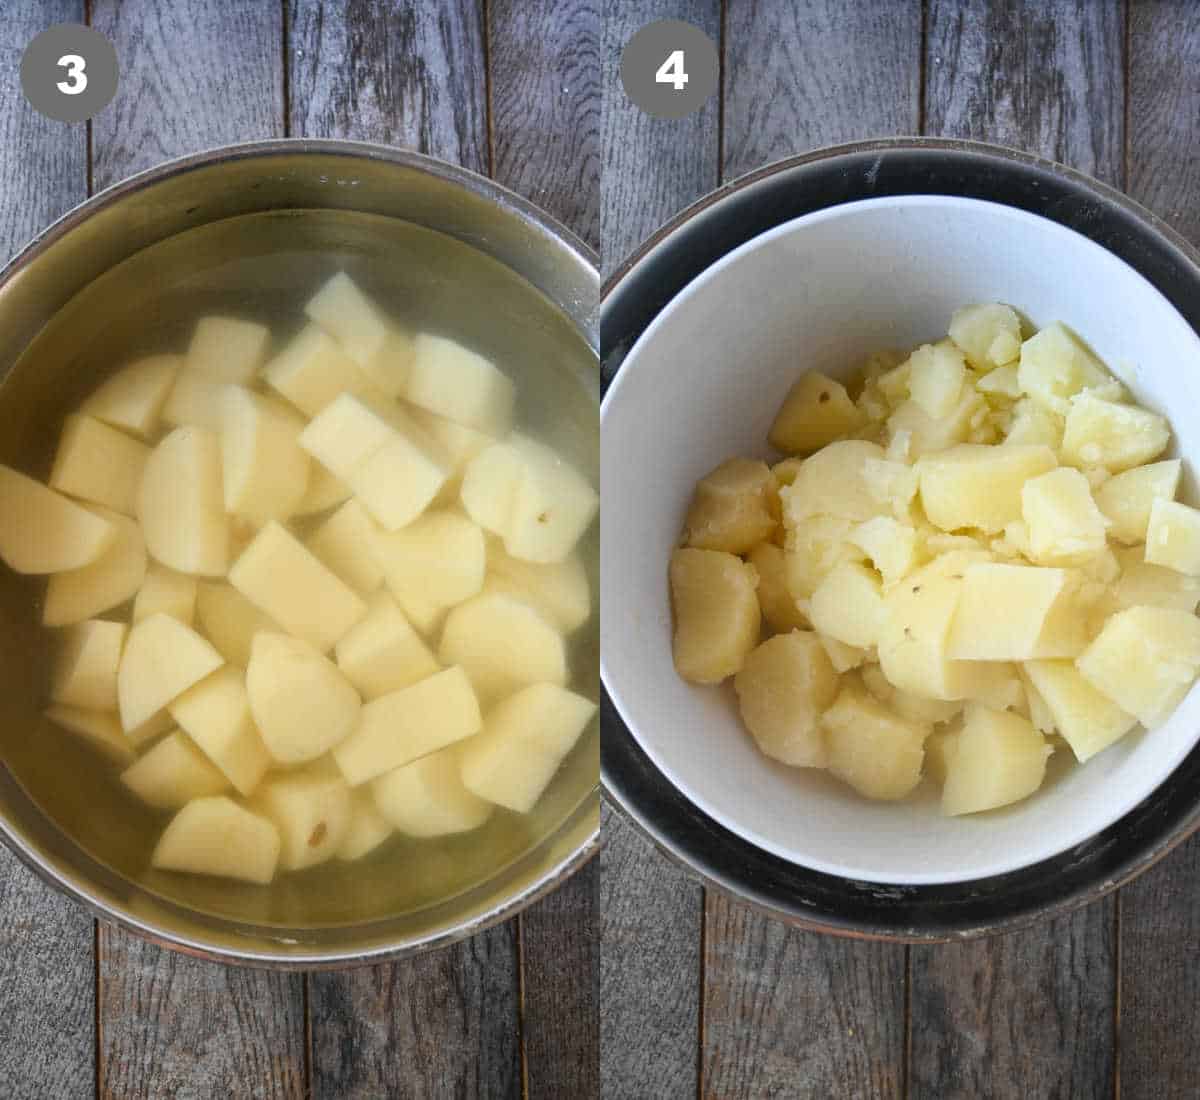 Diced up potatoes being boiled.